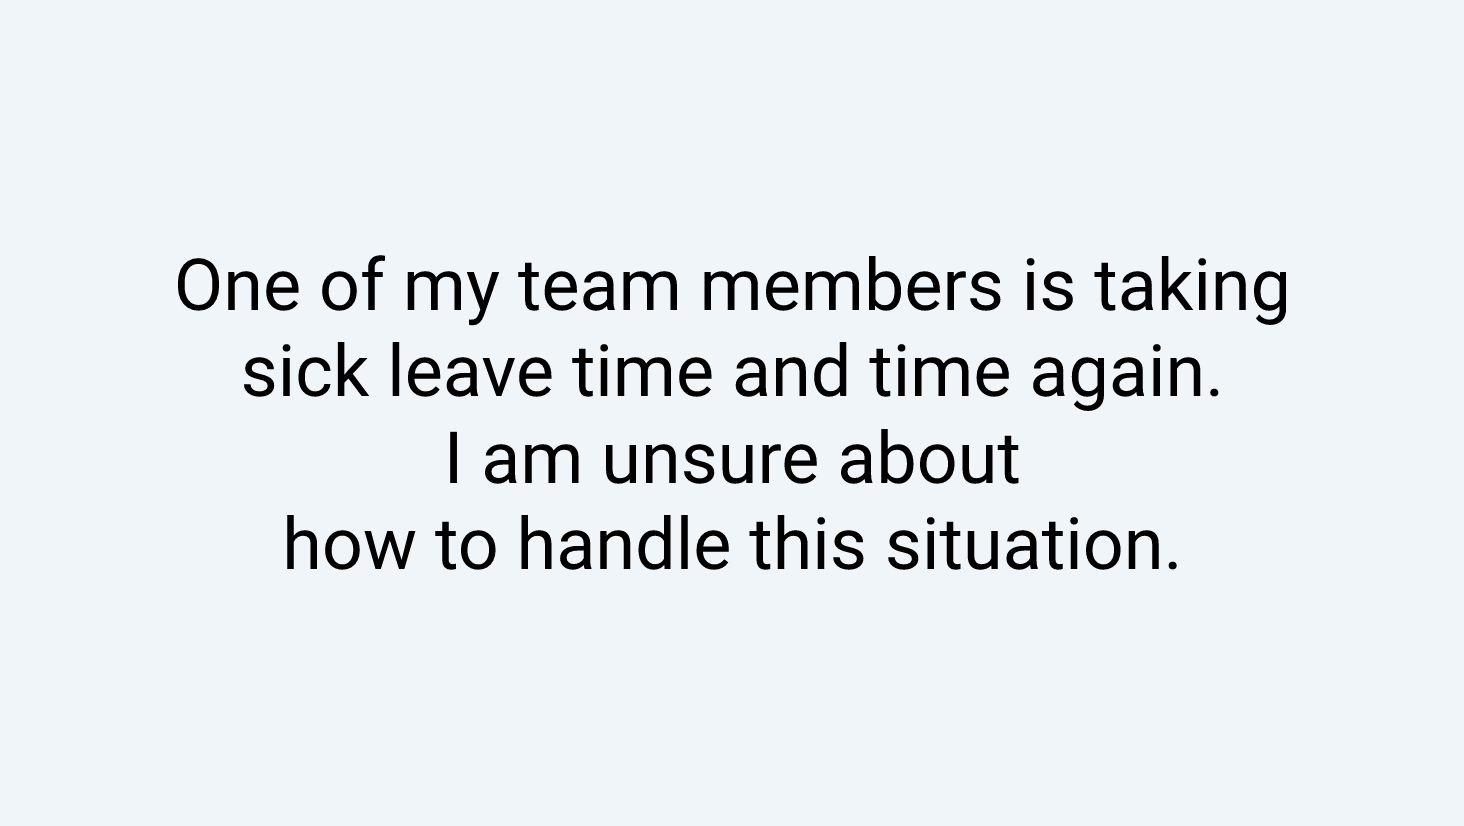 One of my team members is taking sick leave time and time again. I am unsure about how to handle this situation.